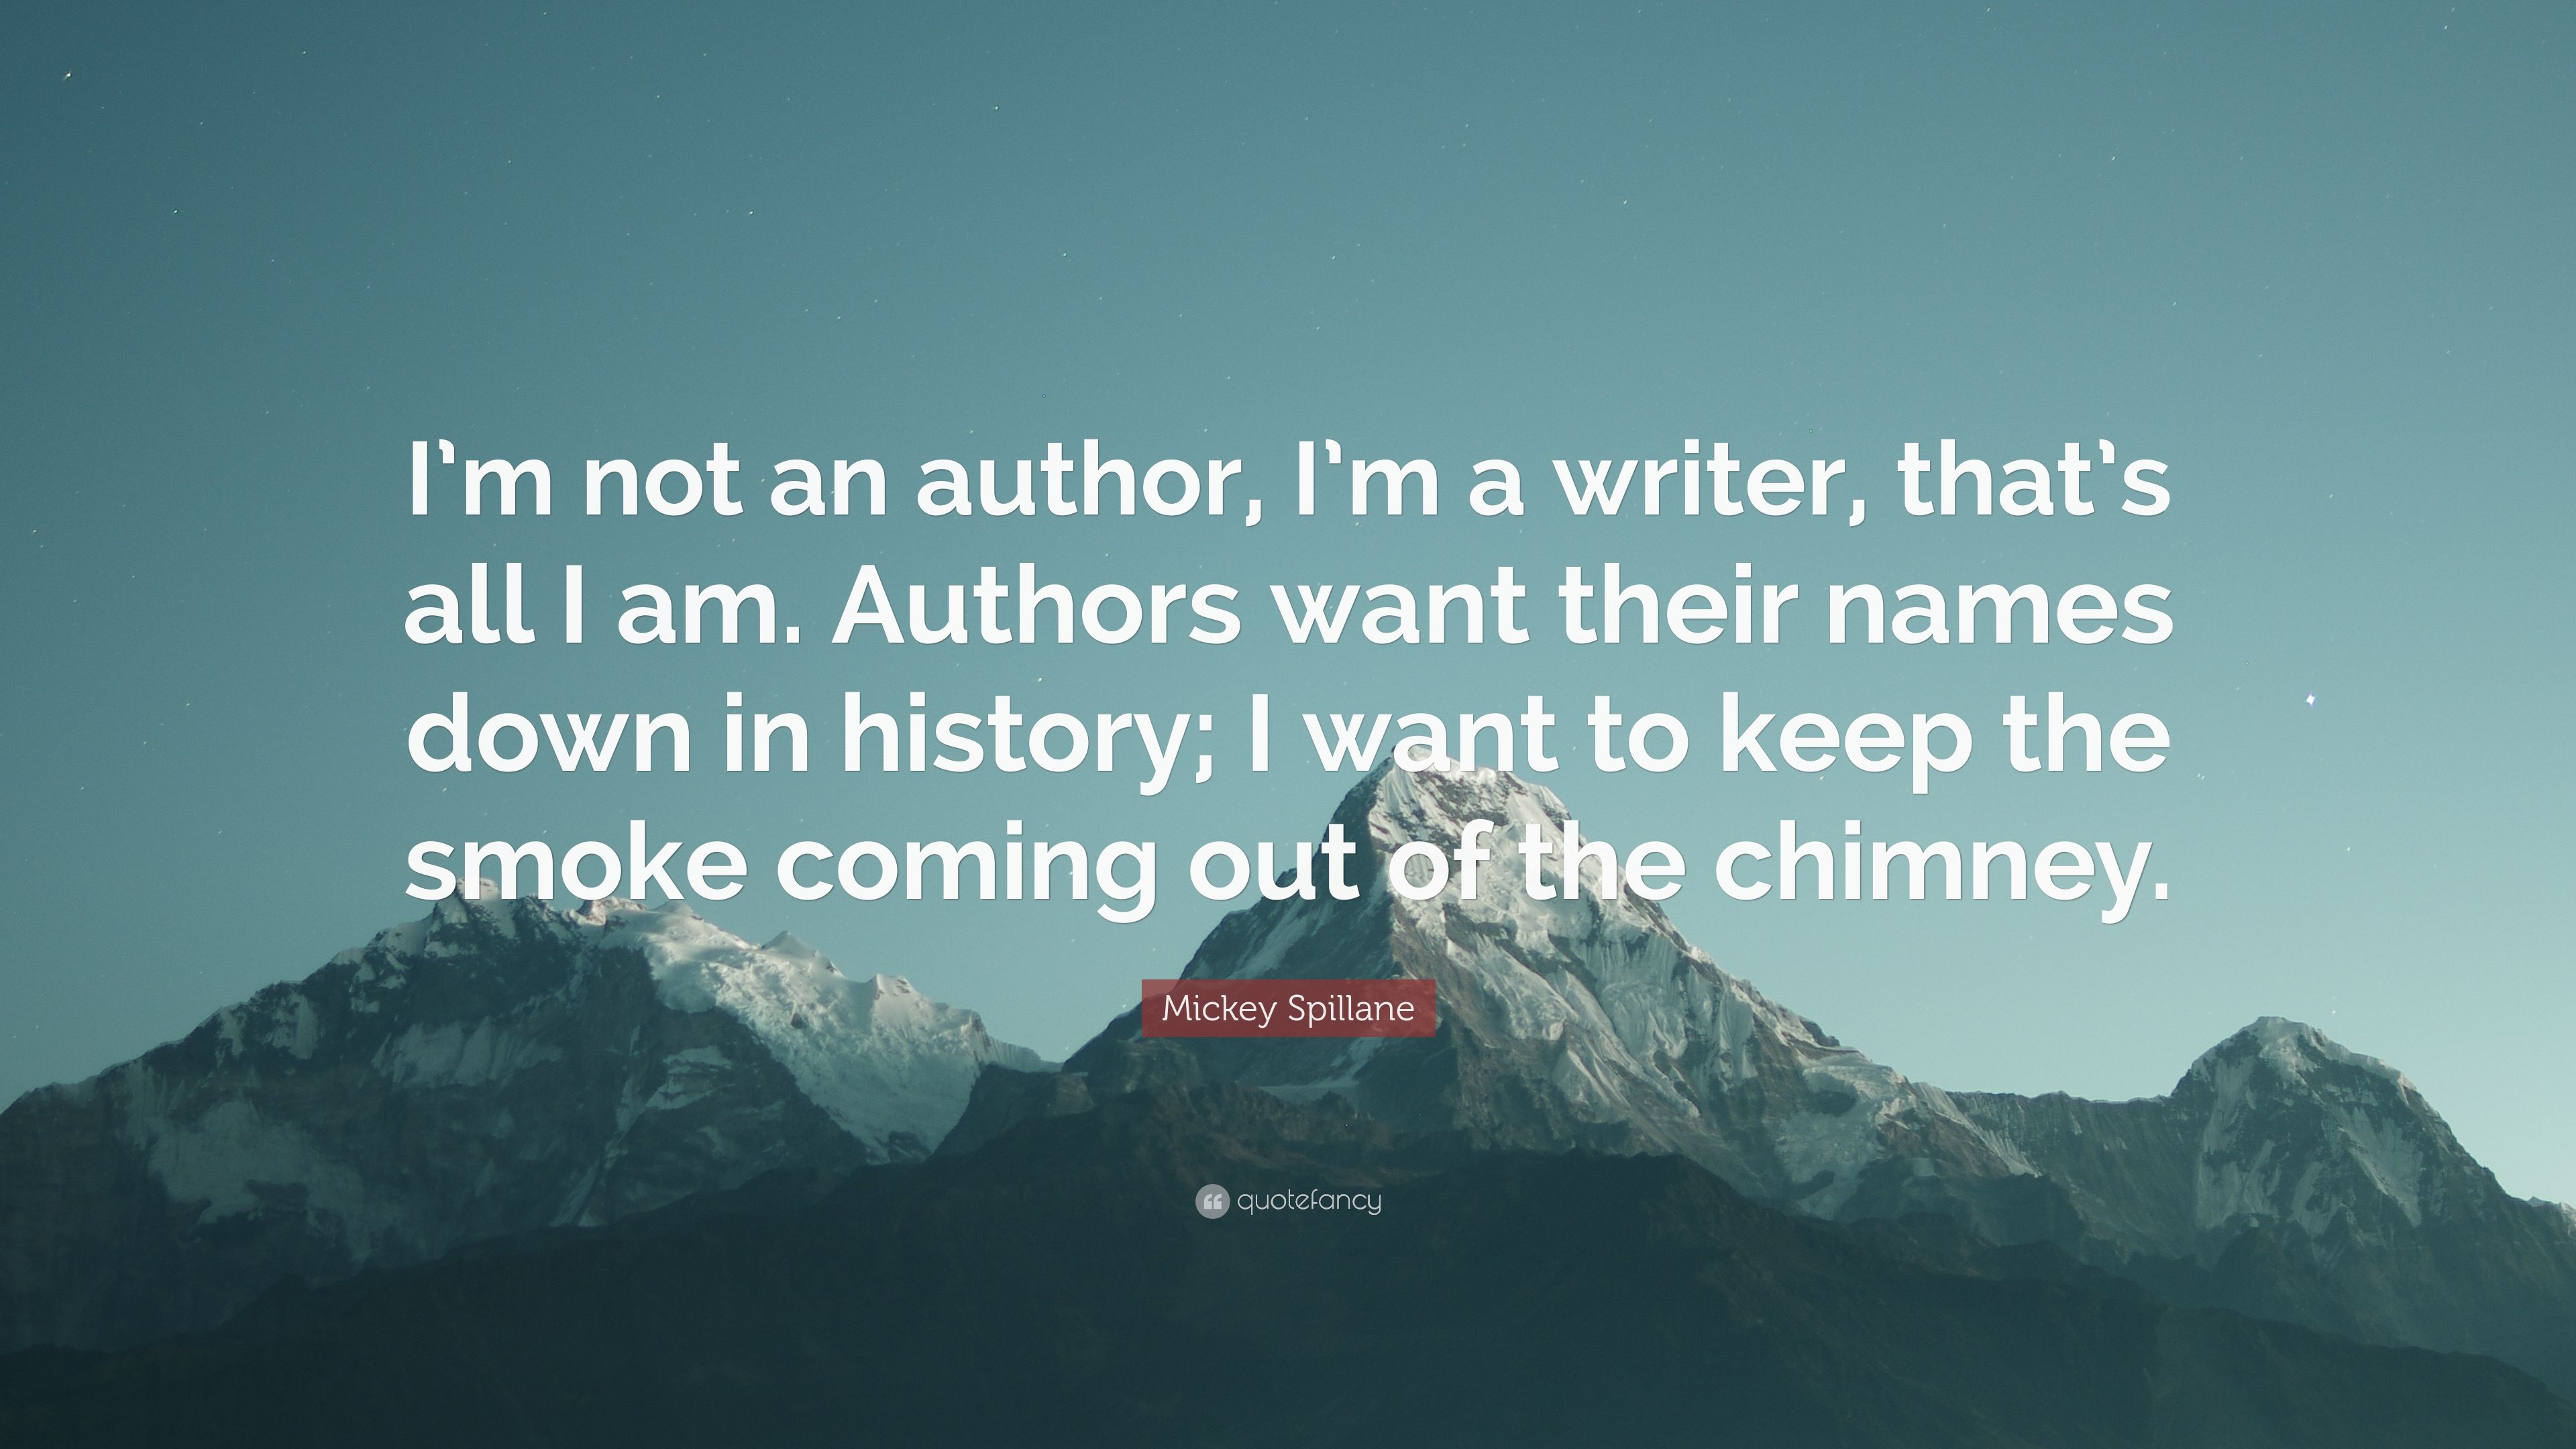 Mickey Spillane Quote: “I'm not an author, I'm a writer, that's all I am. Authors want their names down in history; I want to keep the smoke com.” (7 wallpaper)